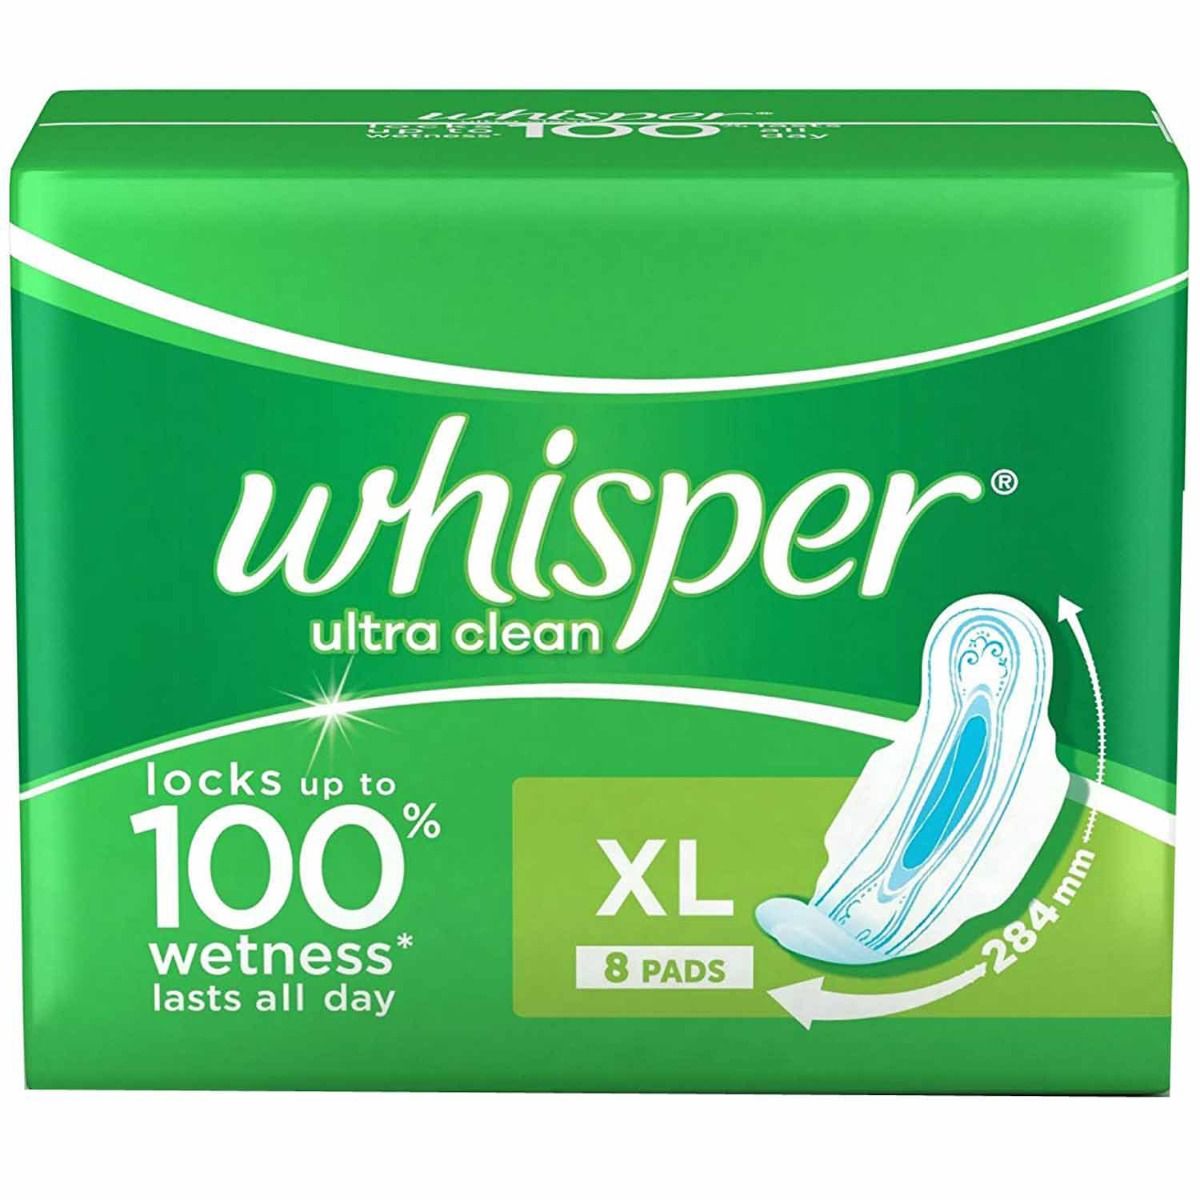 Whisper Ultra Clean Wings Sanitary Pads XL, 8 Count, Pack of 1 